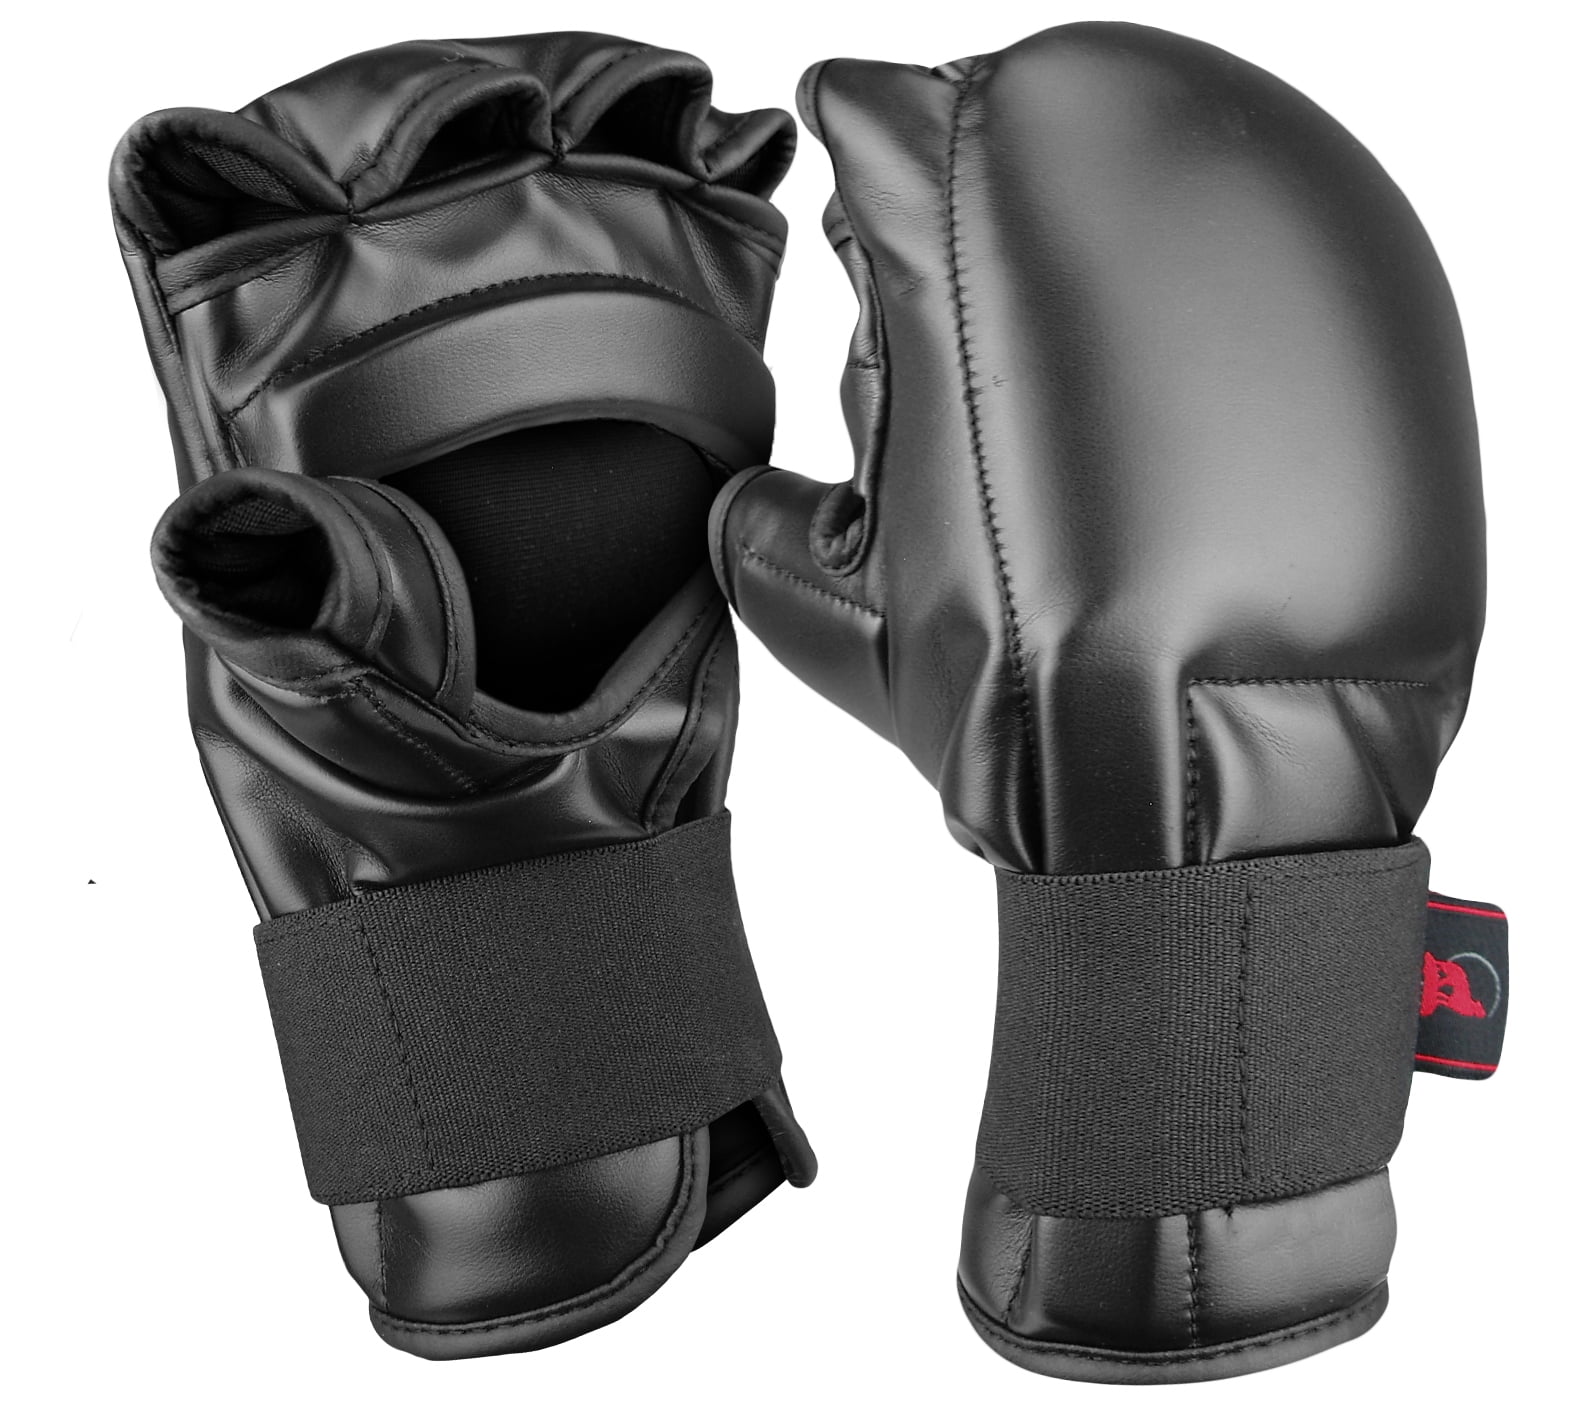 MMA UFC Sparring Grappling Fight Boxing Punch Ultimate Mitts Leather Gloves BZ 